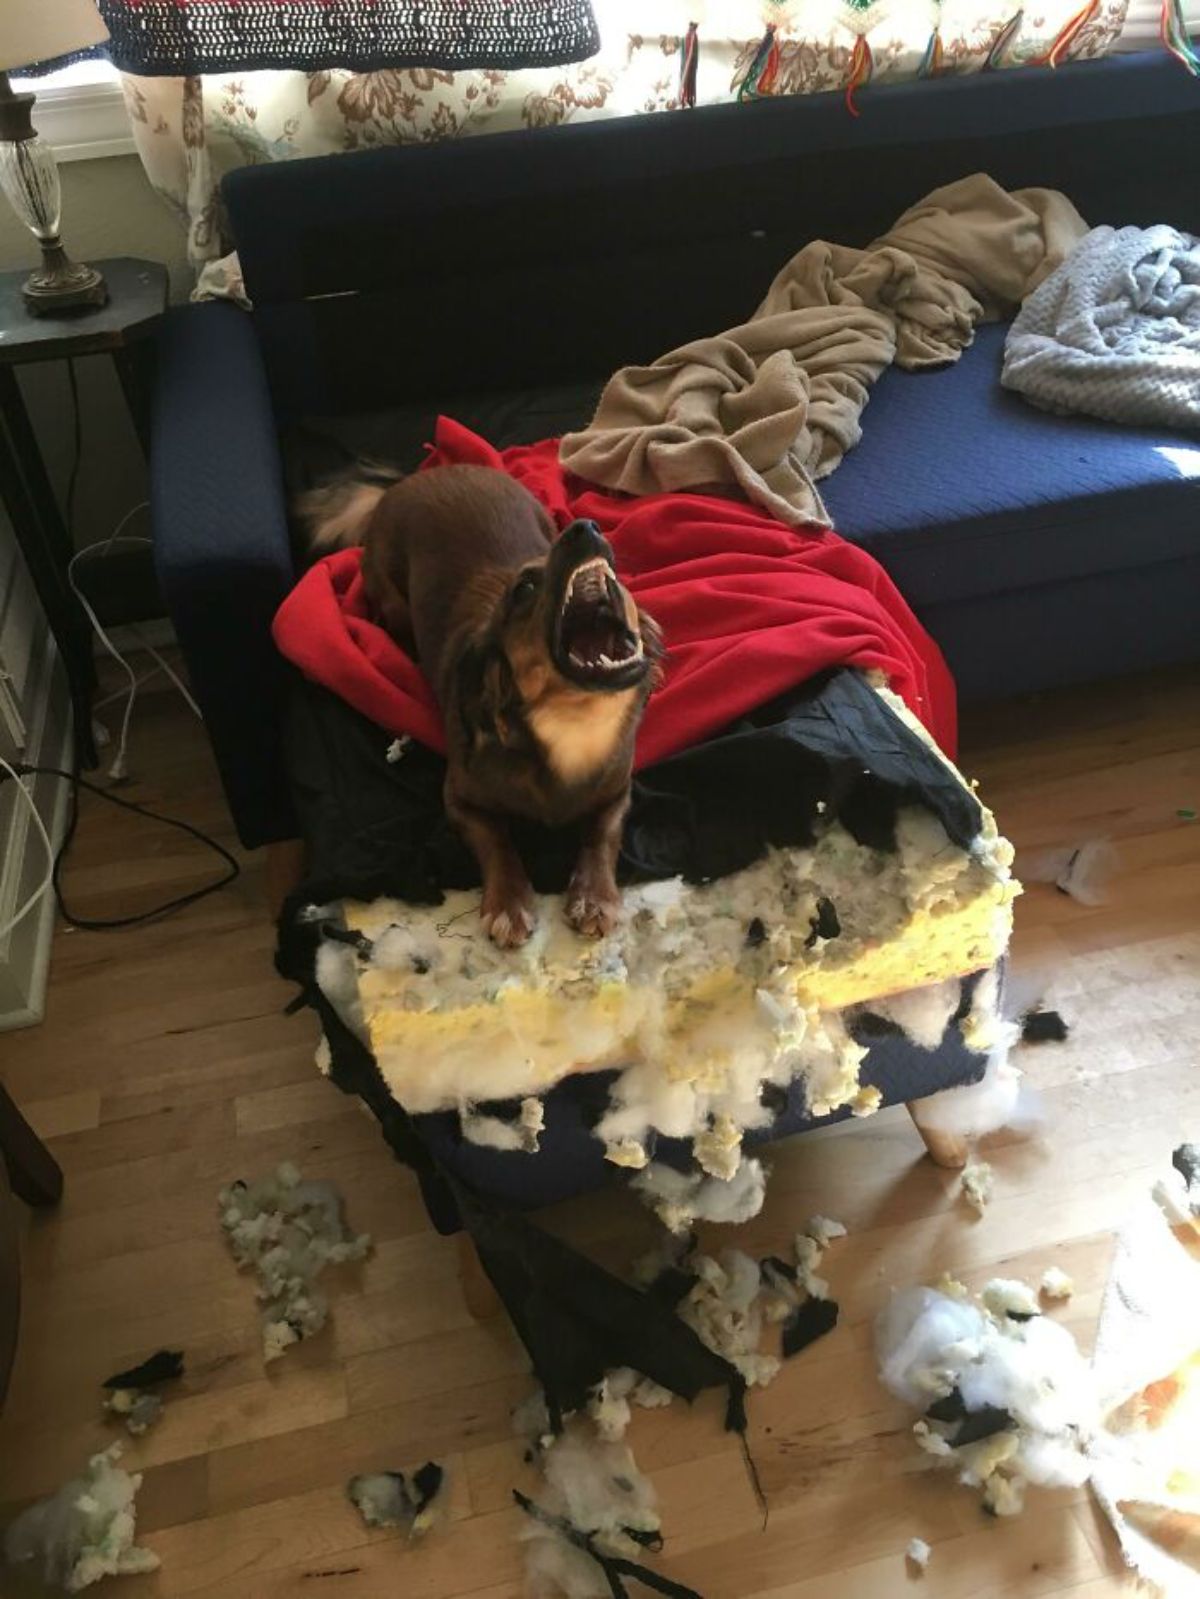 brown dog standing on a couch and a couch cushion with the mouth open and the cushion is ripped